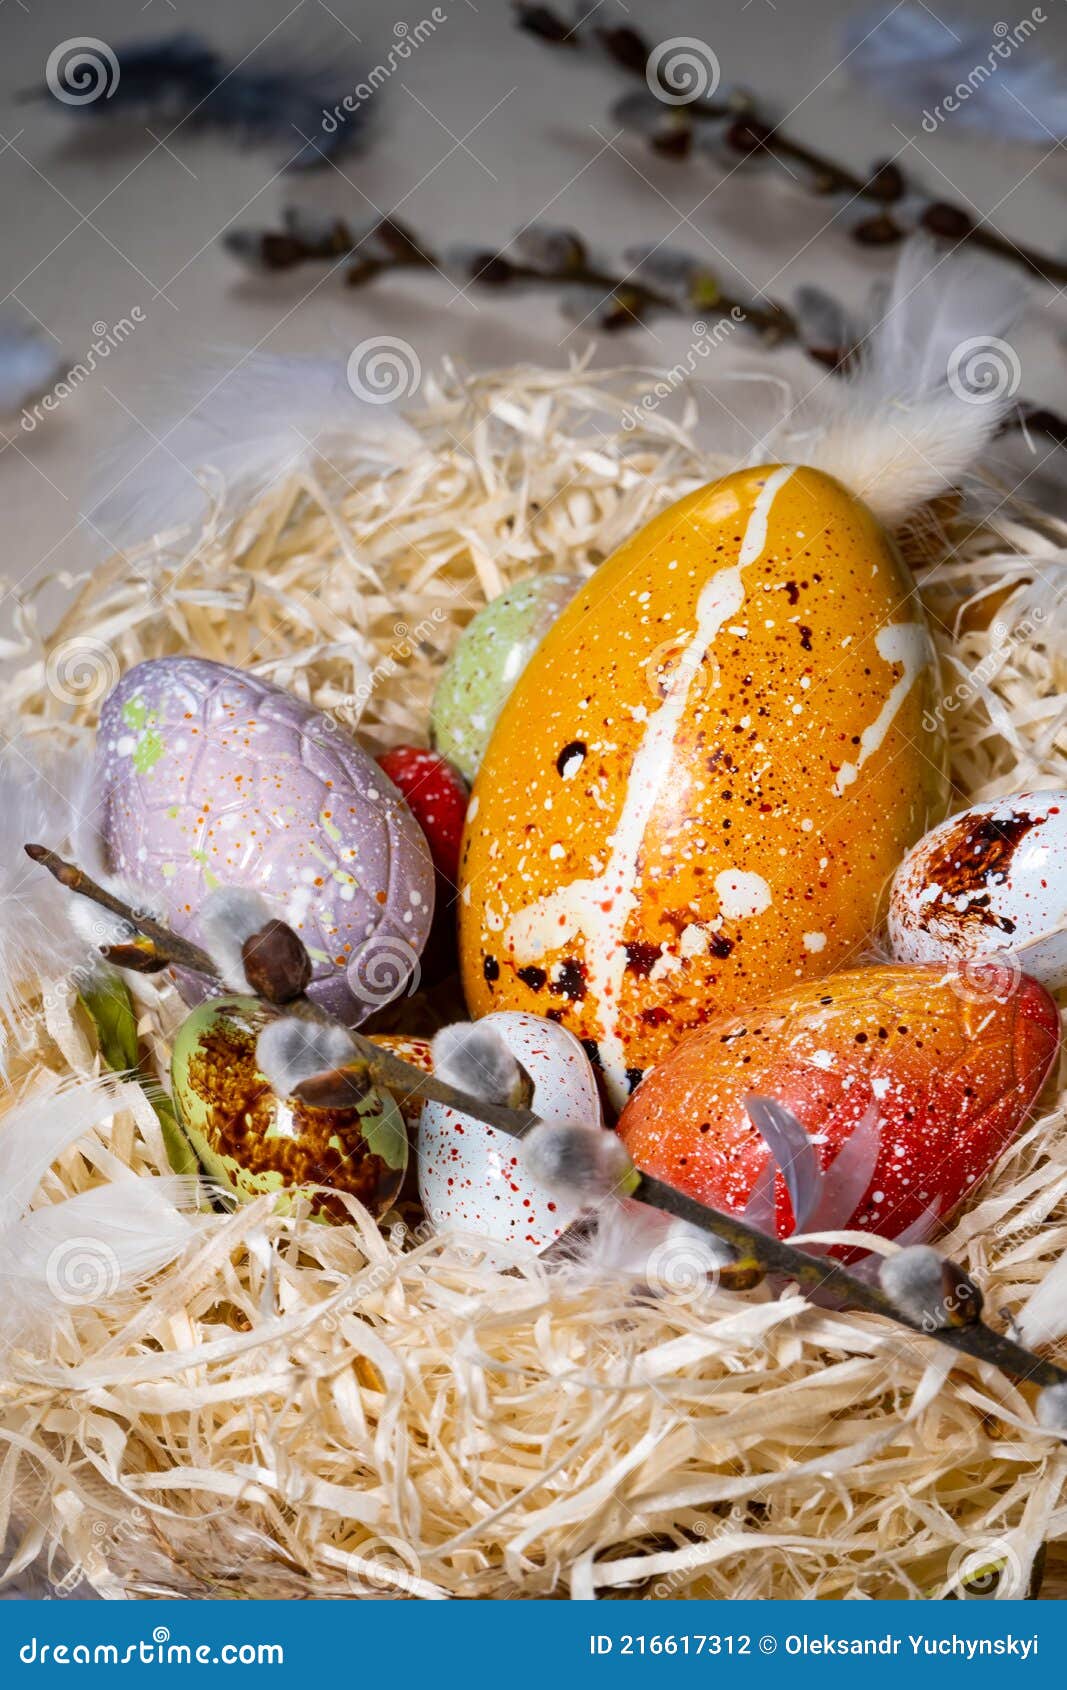 Easter Eggs with Chocolate with a Surprise Inside Stock Photo - Image ...